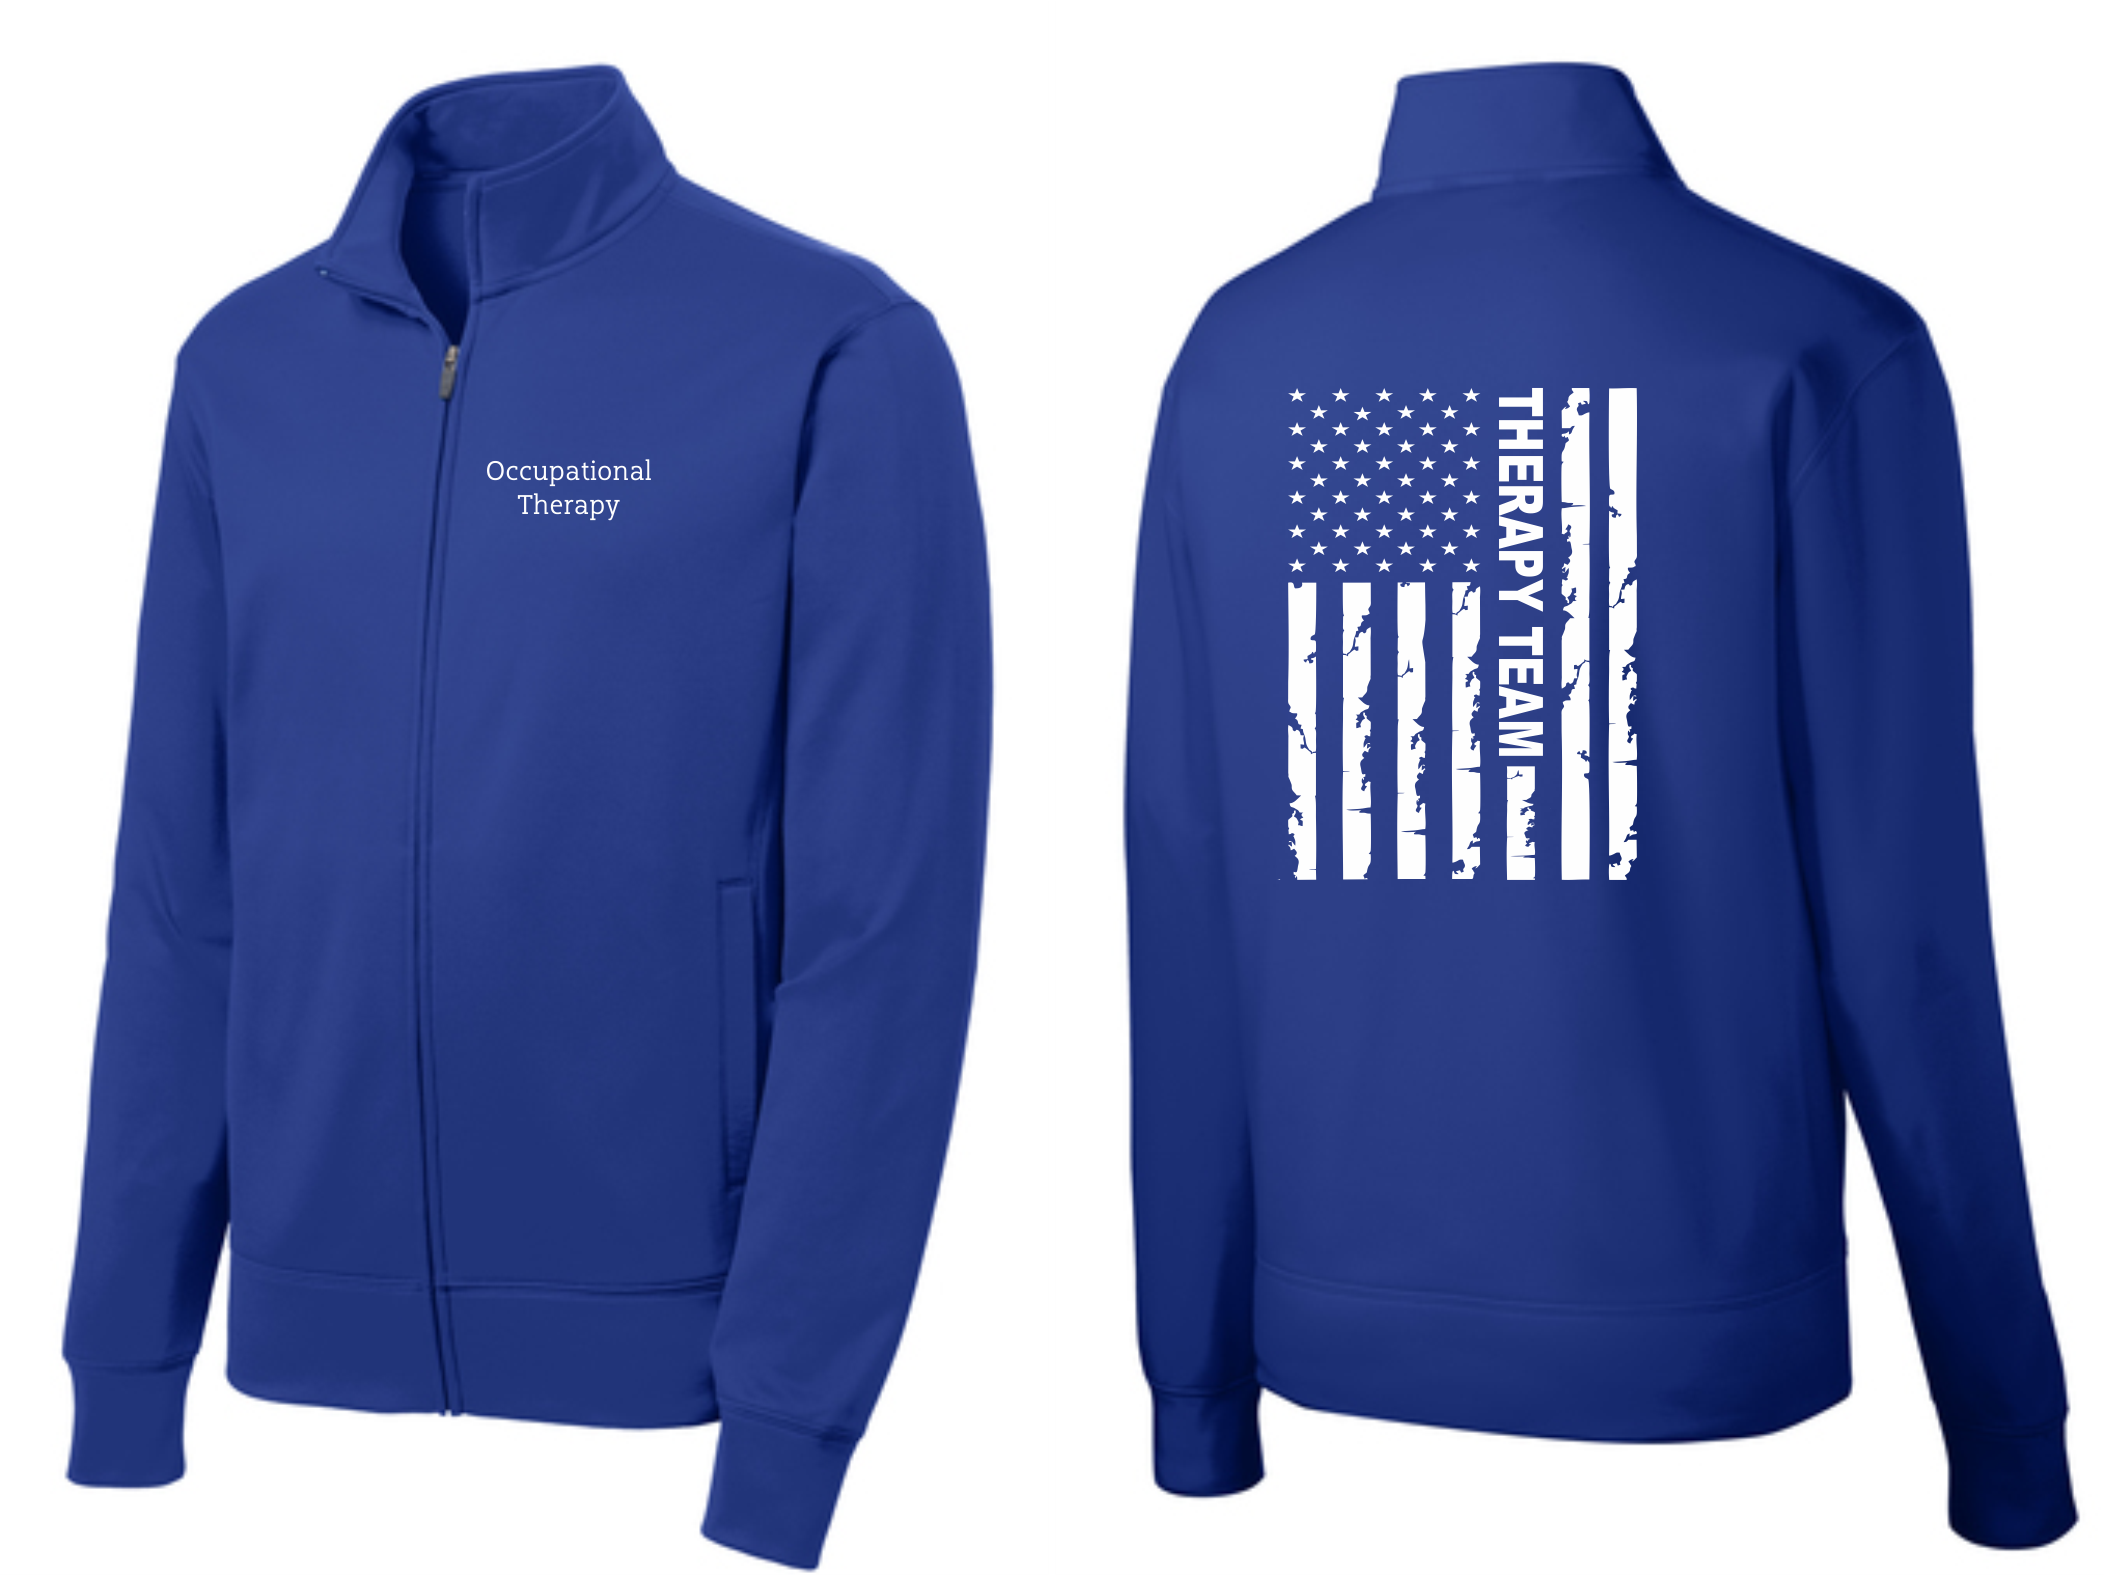 PHW - Occupational Therapy Flag - Mens 1/2 or Full Zip Jacket